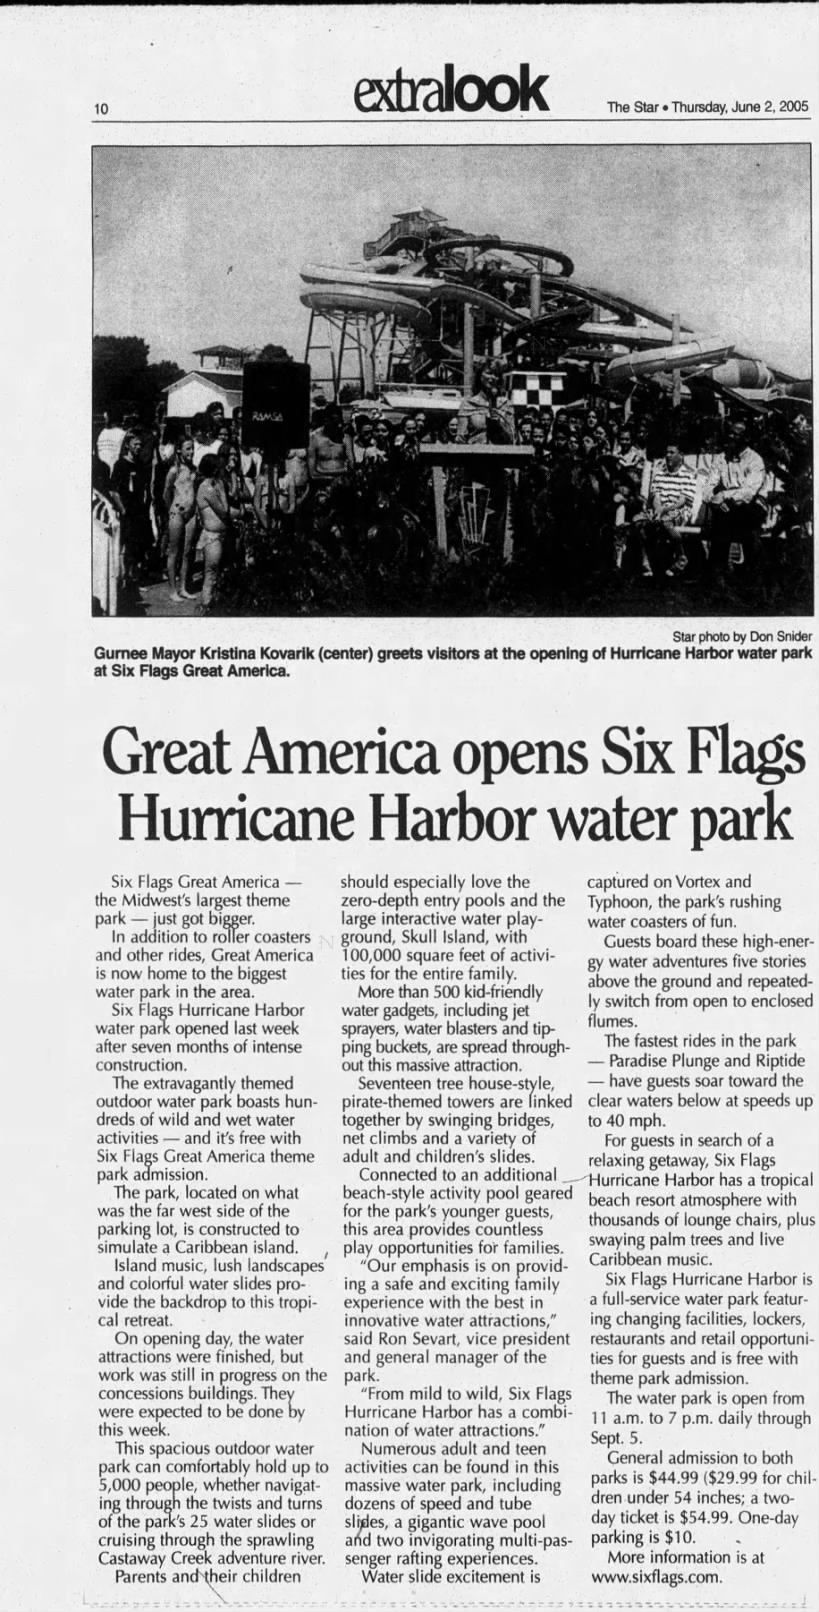 "Great America opens Six Flags Hurricane Harbor water park"